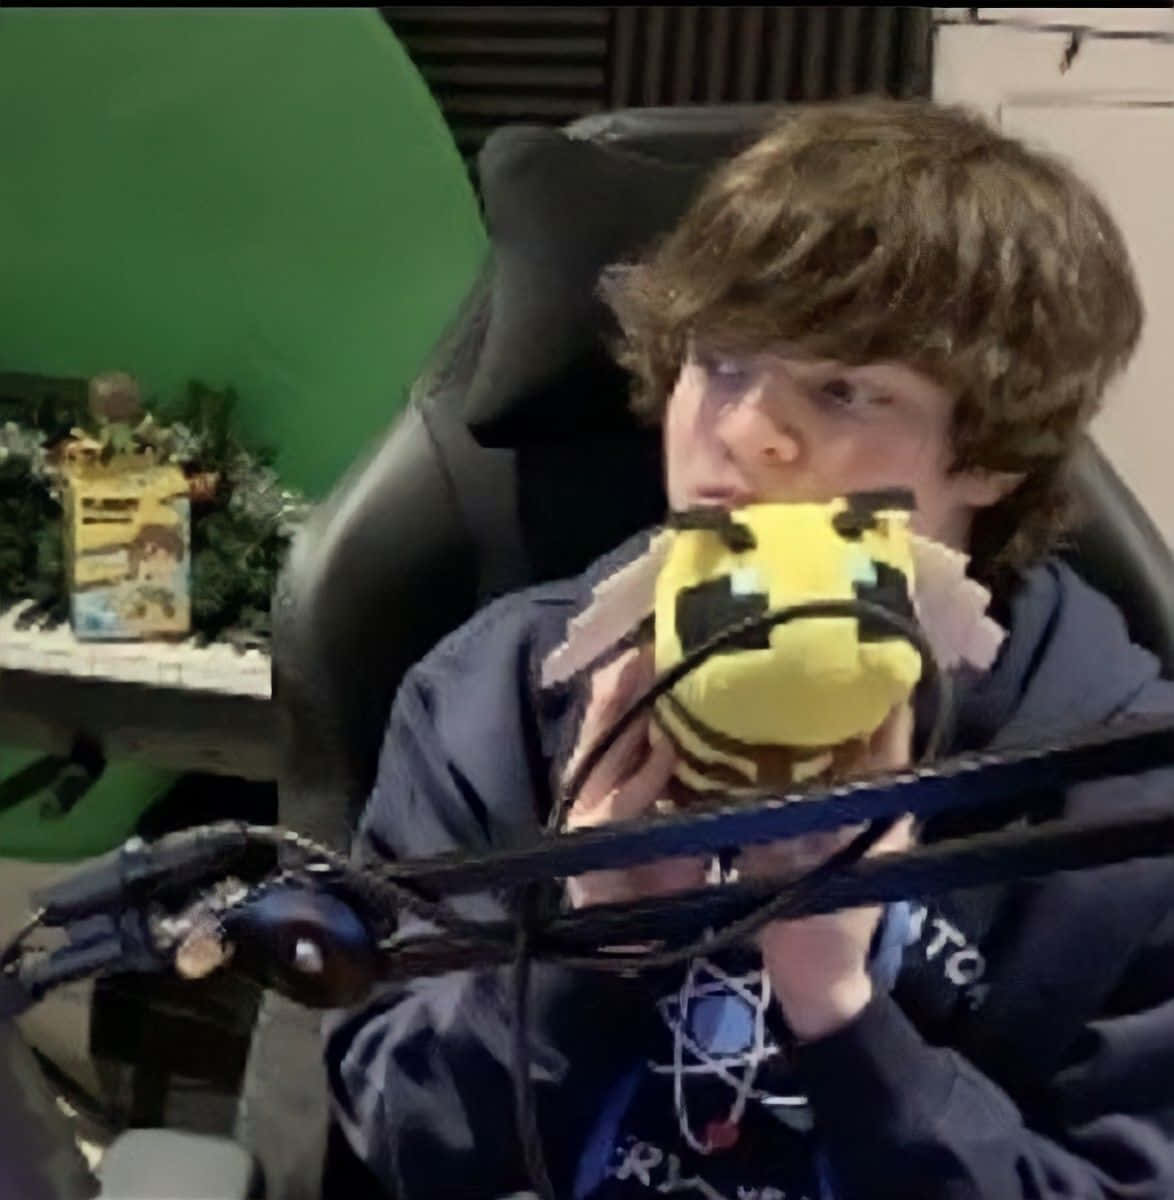 A Boy Holding A Stuffed Animal In Front Of A Microphone